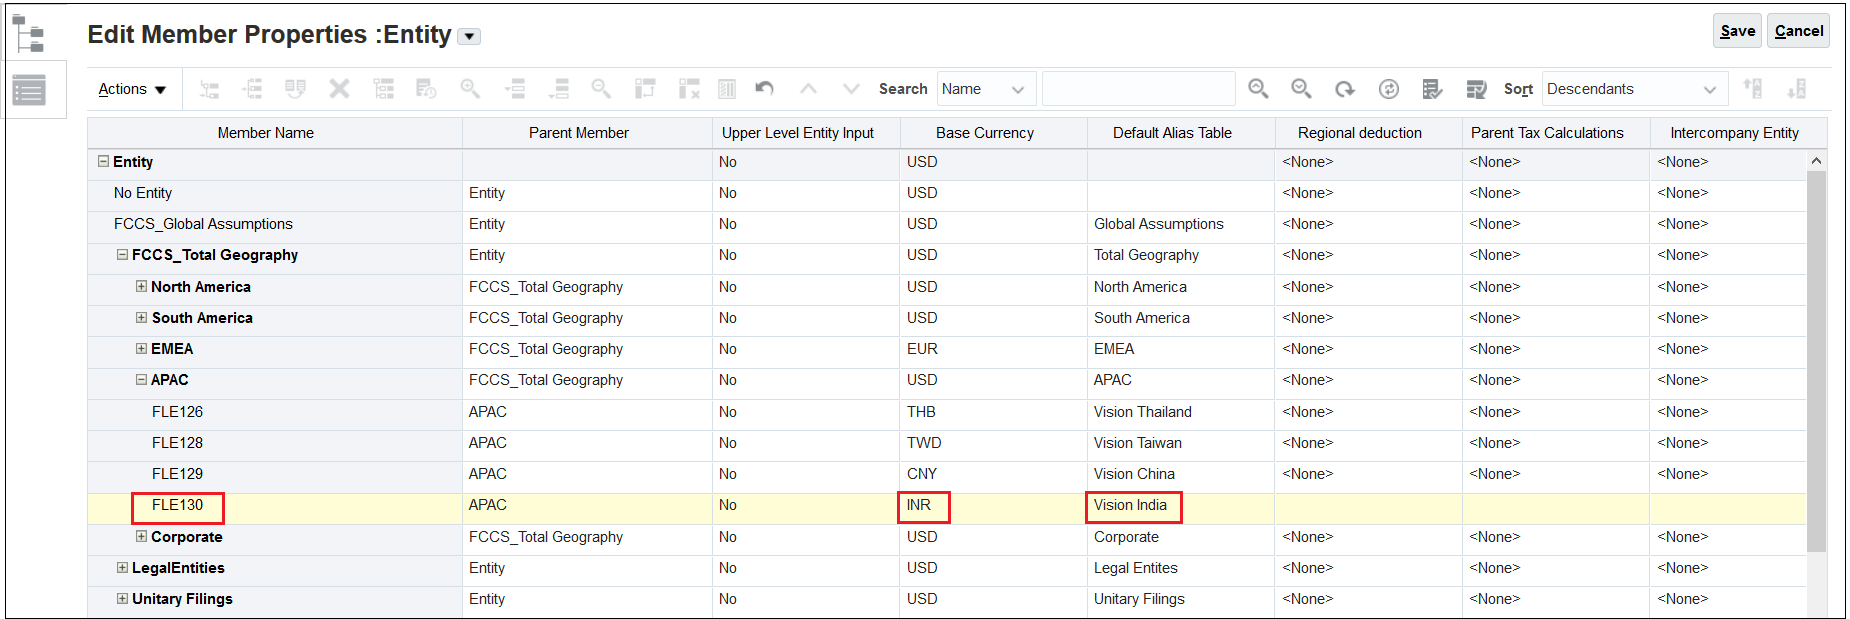 Entity screen with FLE130 entered for the Member Name, Visiion India entered for the Default Table Alias, and INR entered for the Base Currency